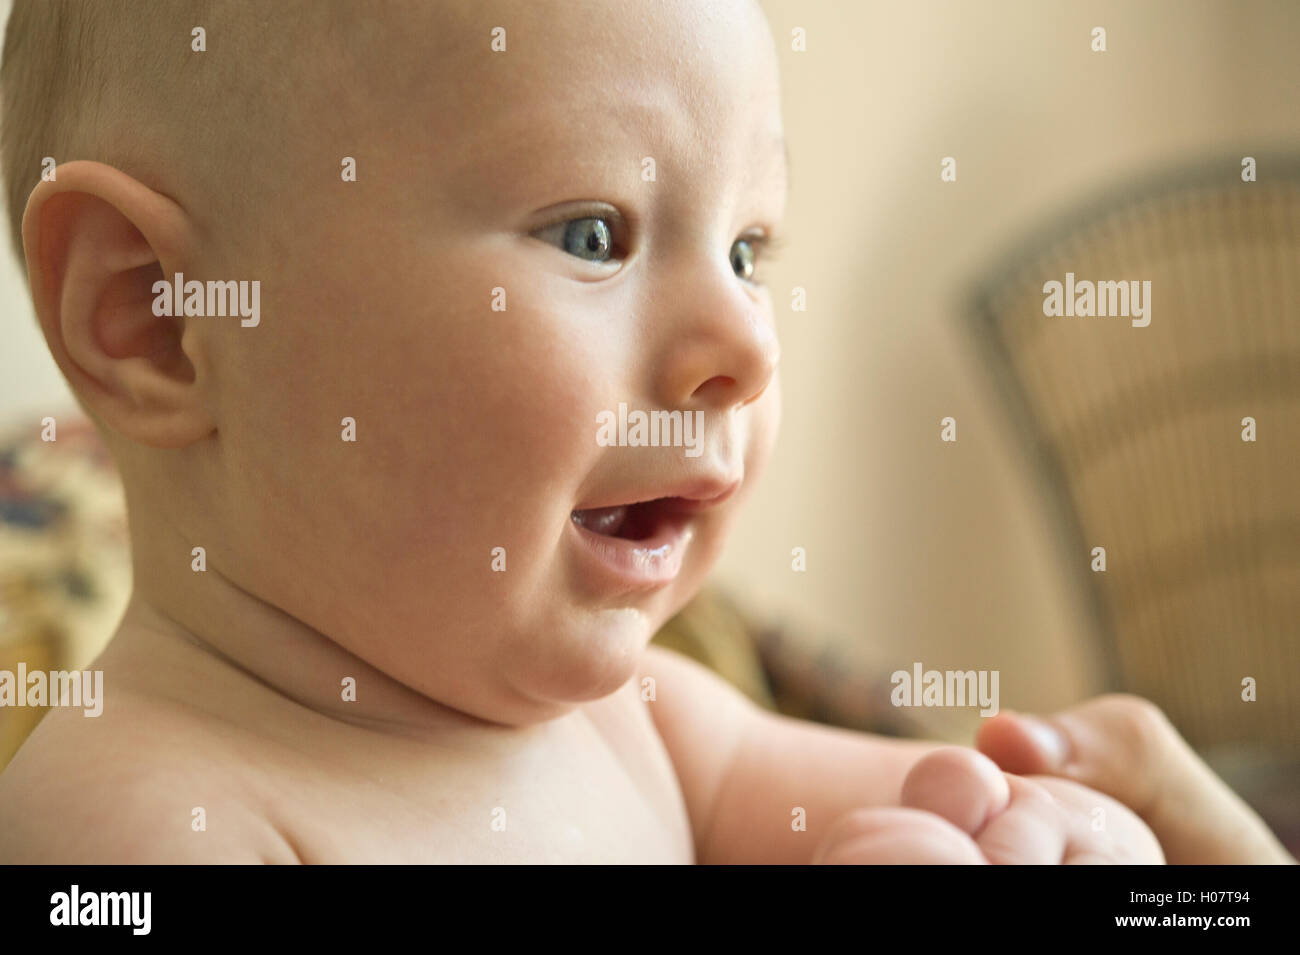 3-months old baby Stock Photo